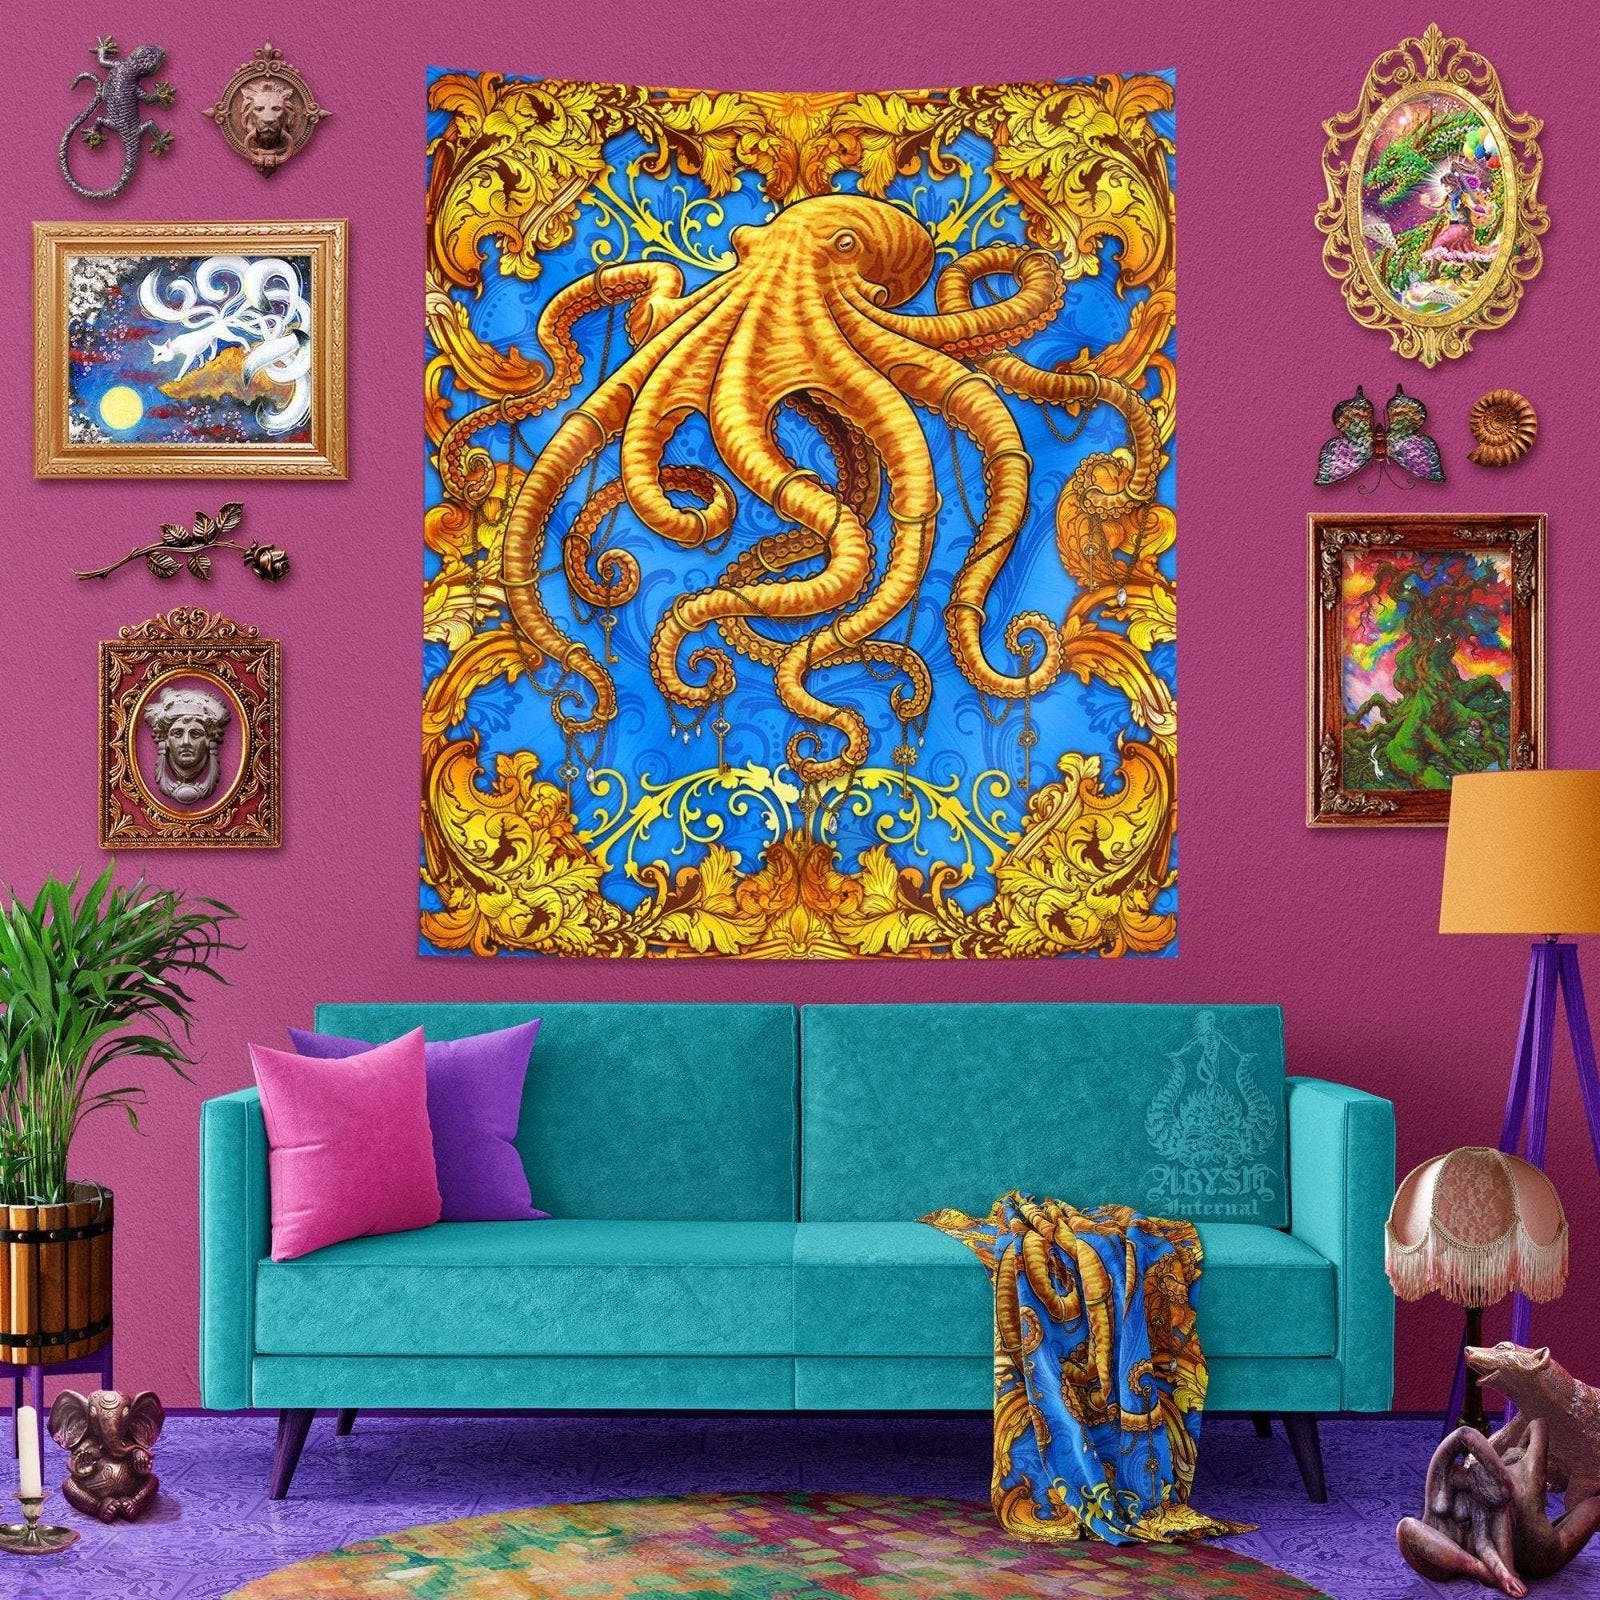 Coastal Tapestry, Octopus Wall Hanging, Ocean Home Decor, Art Print, Eclectic and Funky - Cyan & Gold - Abysm Internal